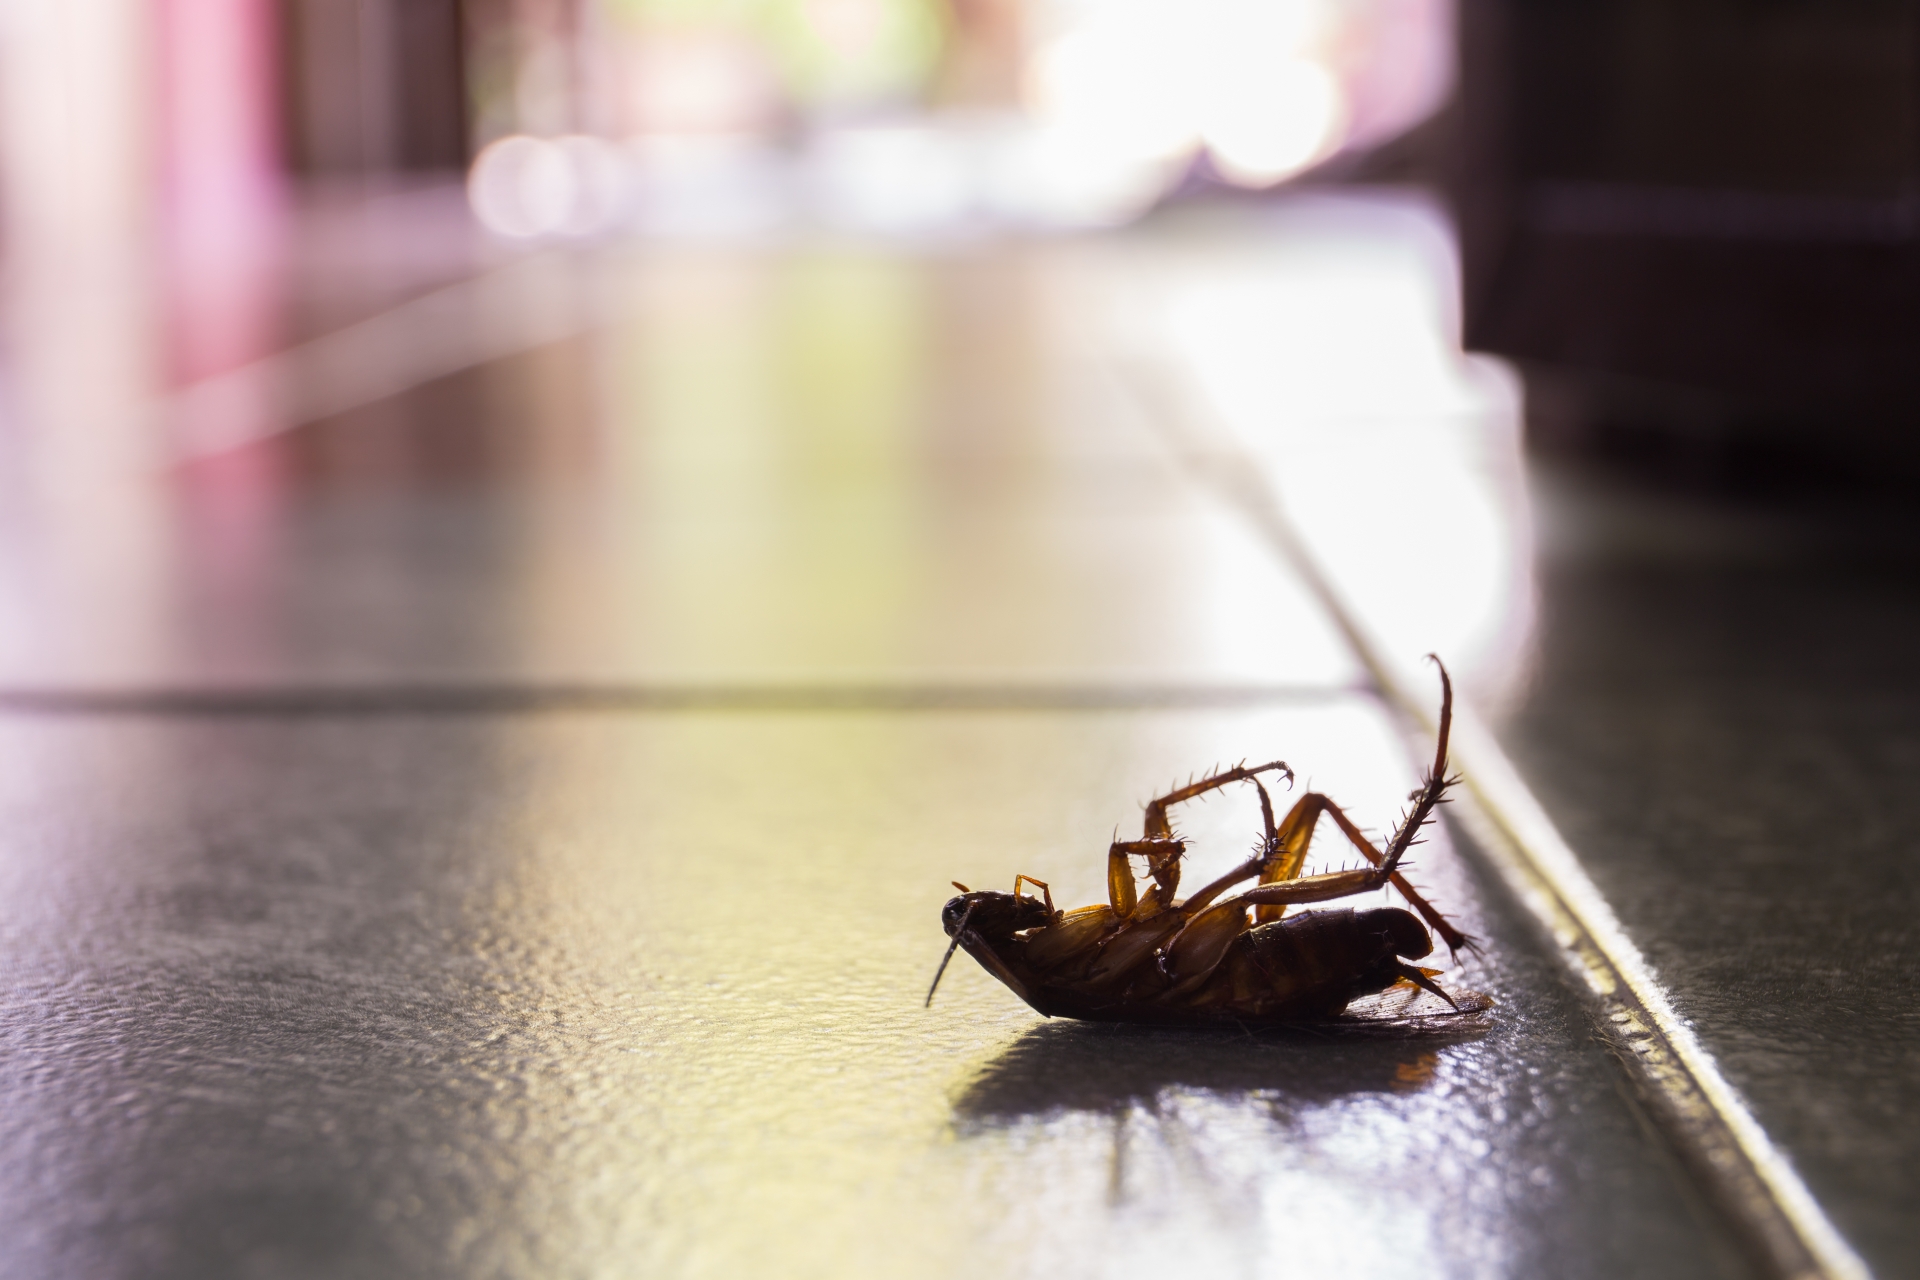 Cockroach Control, Pest Control in Soho, W1. Call Now 020 8166 9746